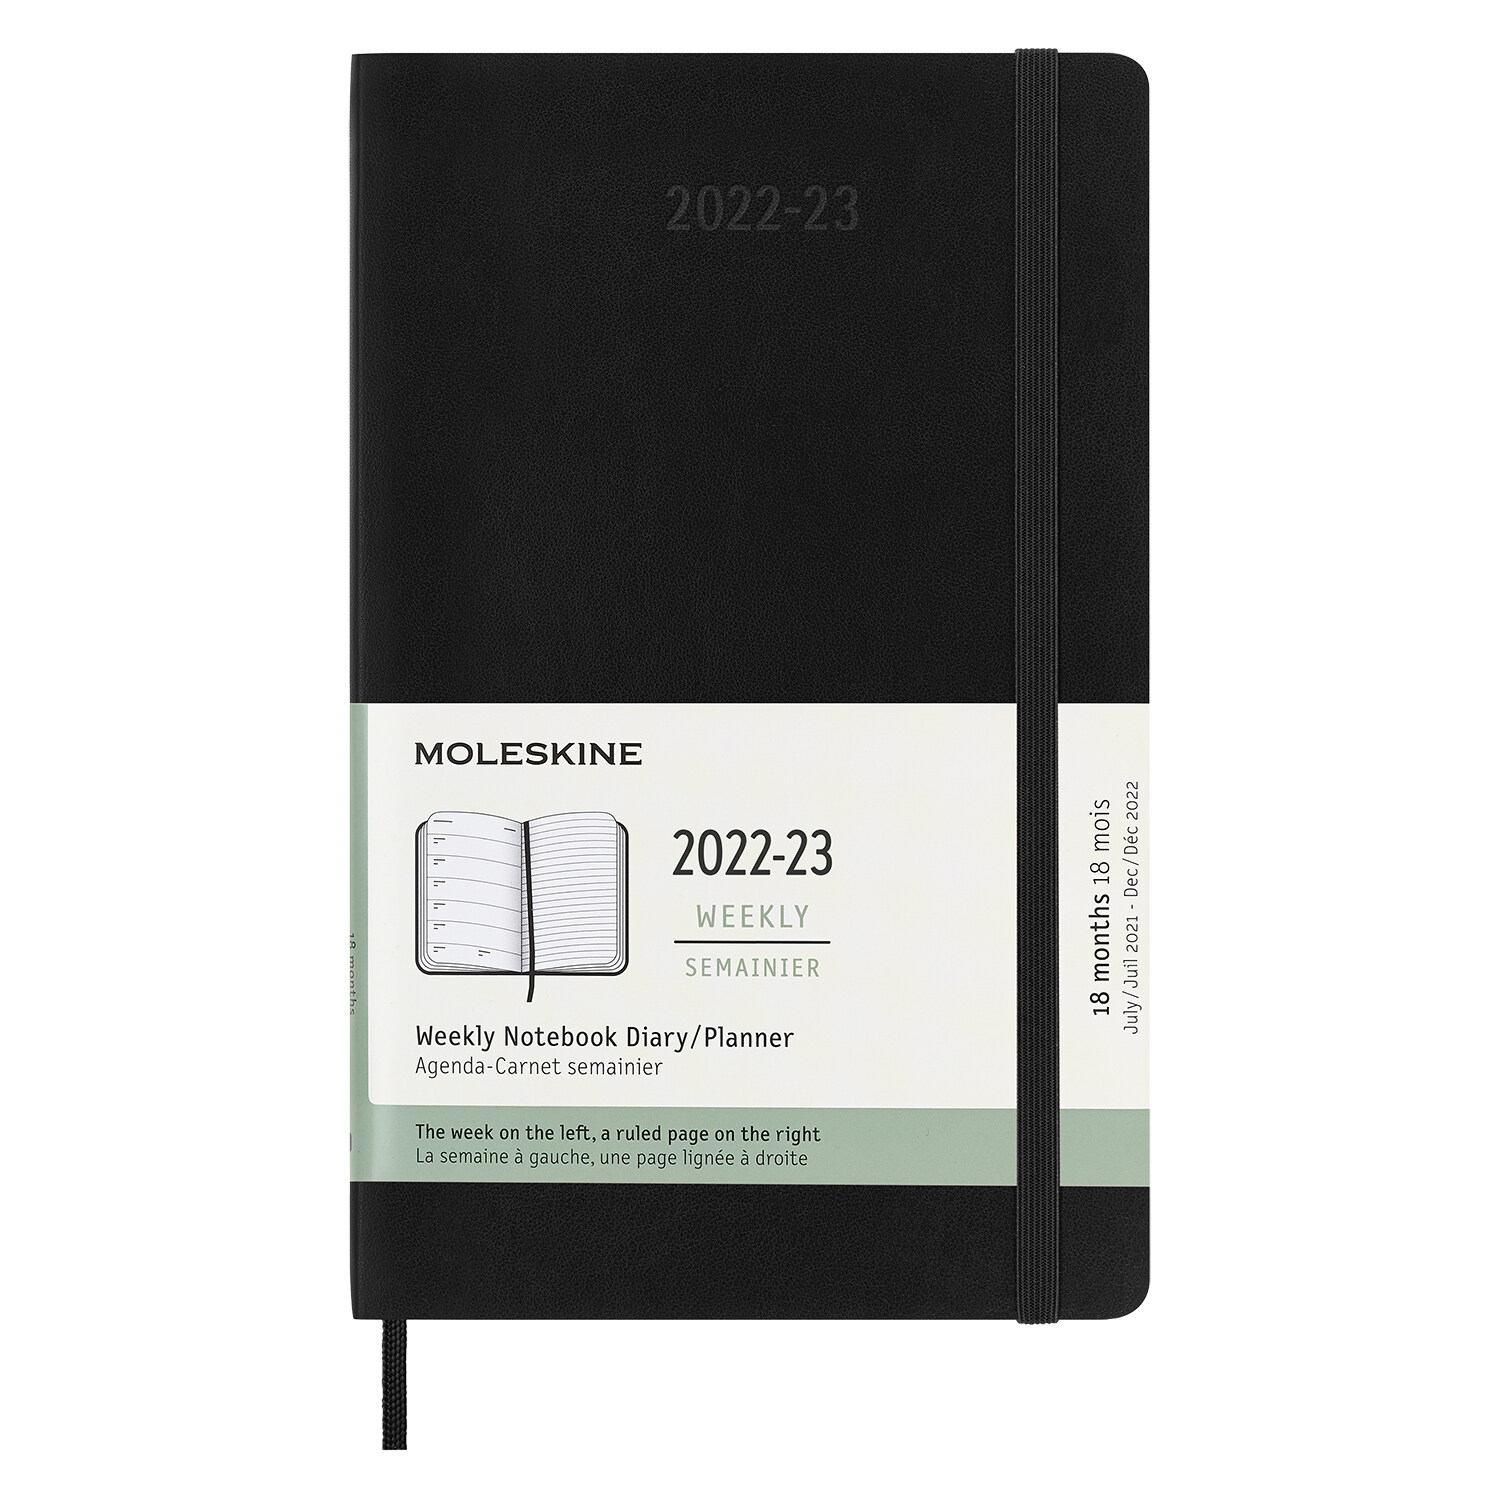 Moleskine 2023 Weekly Notebook Planner, 18m, Large, Black, Soft Cover (5 X 8.25) (Other)